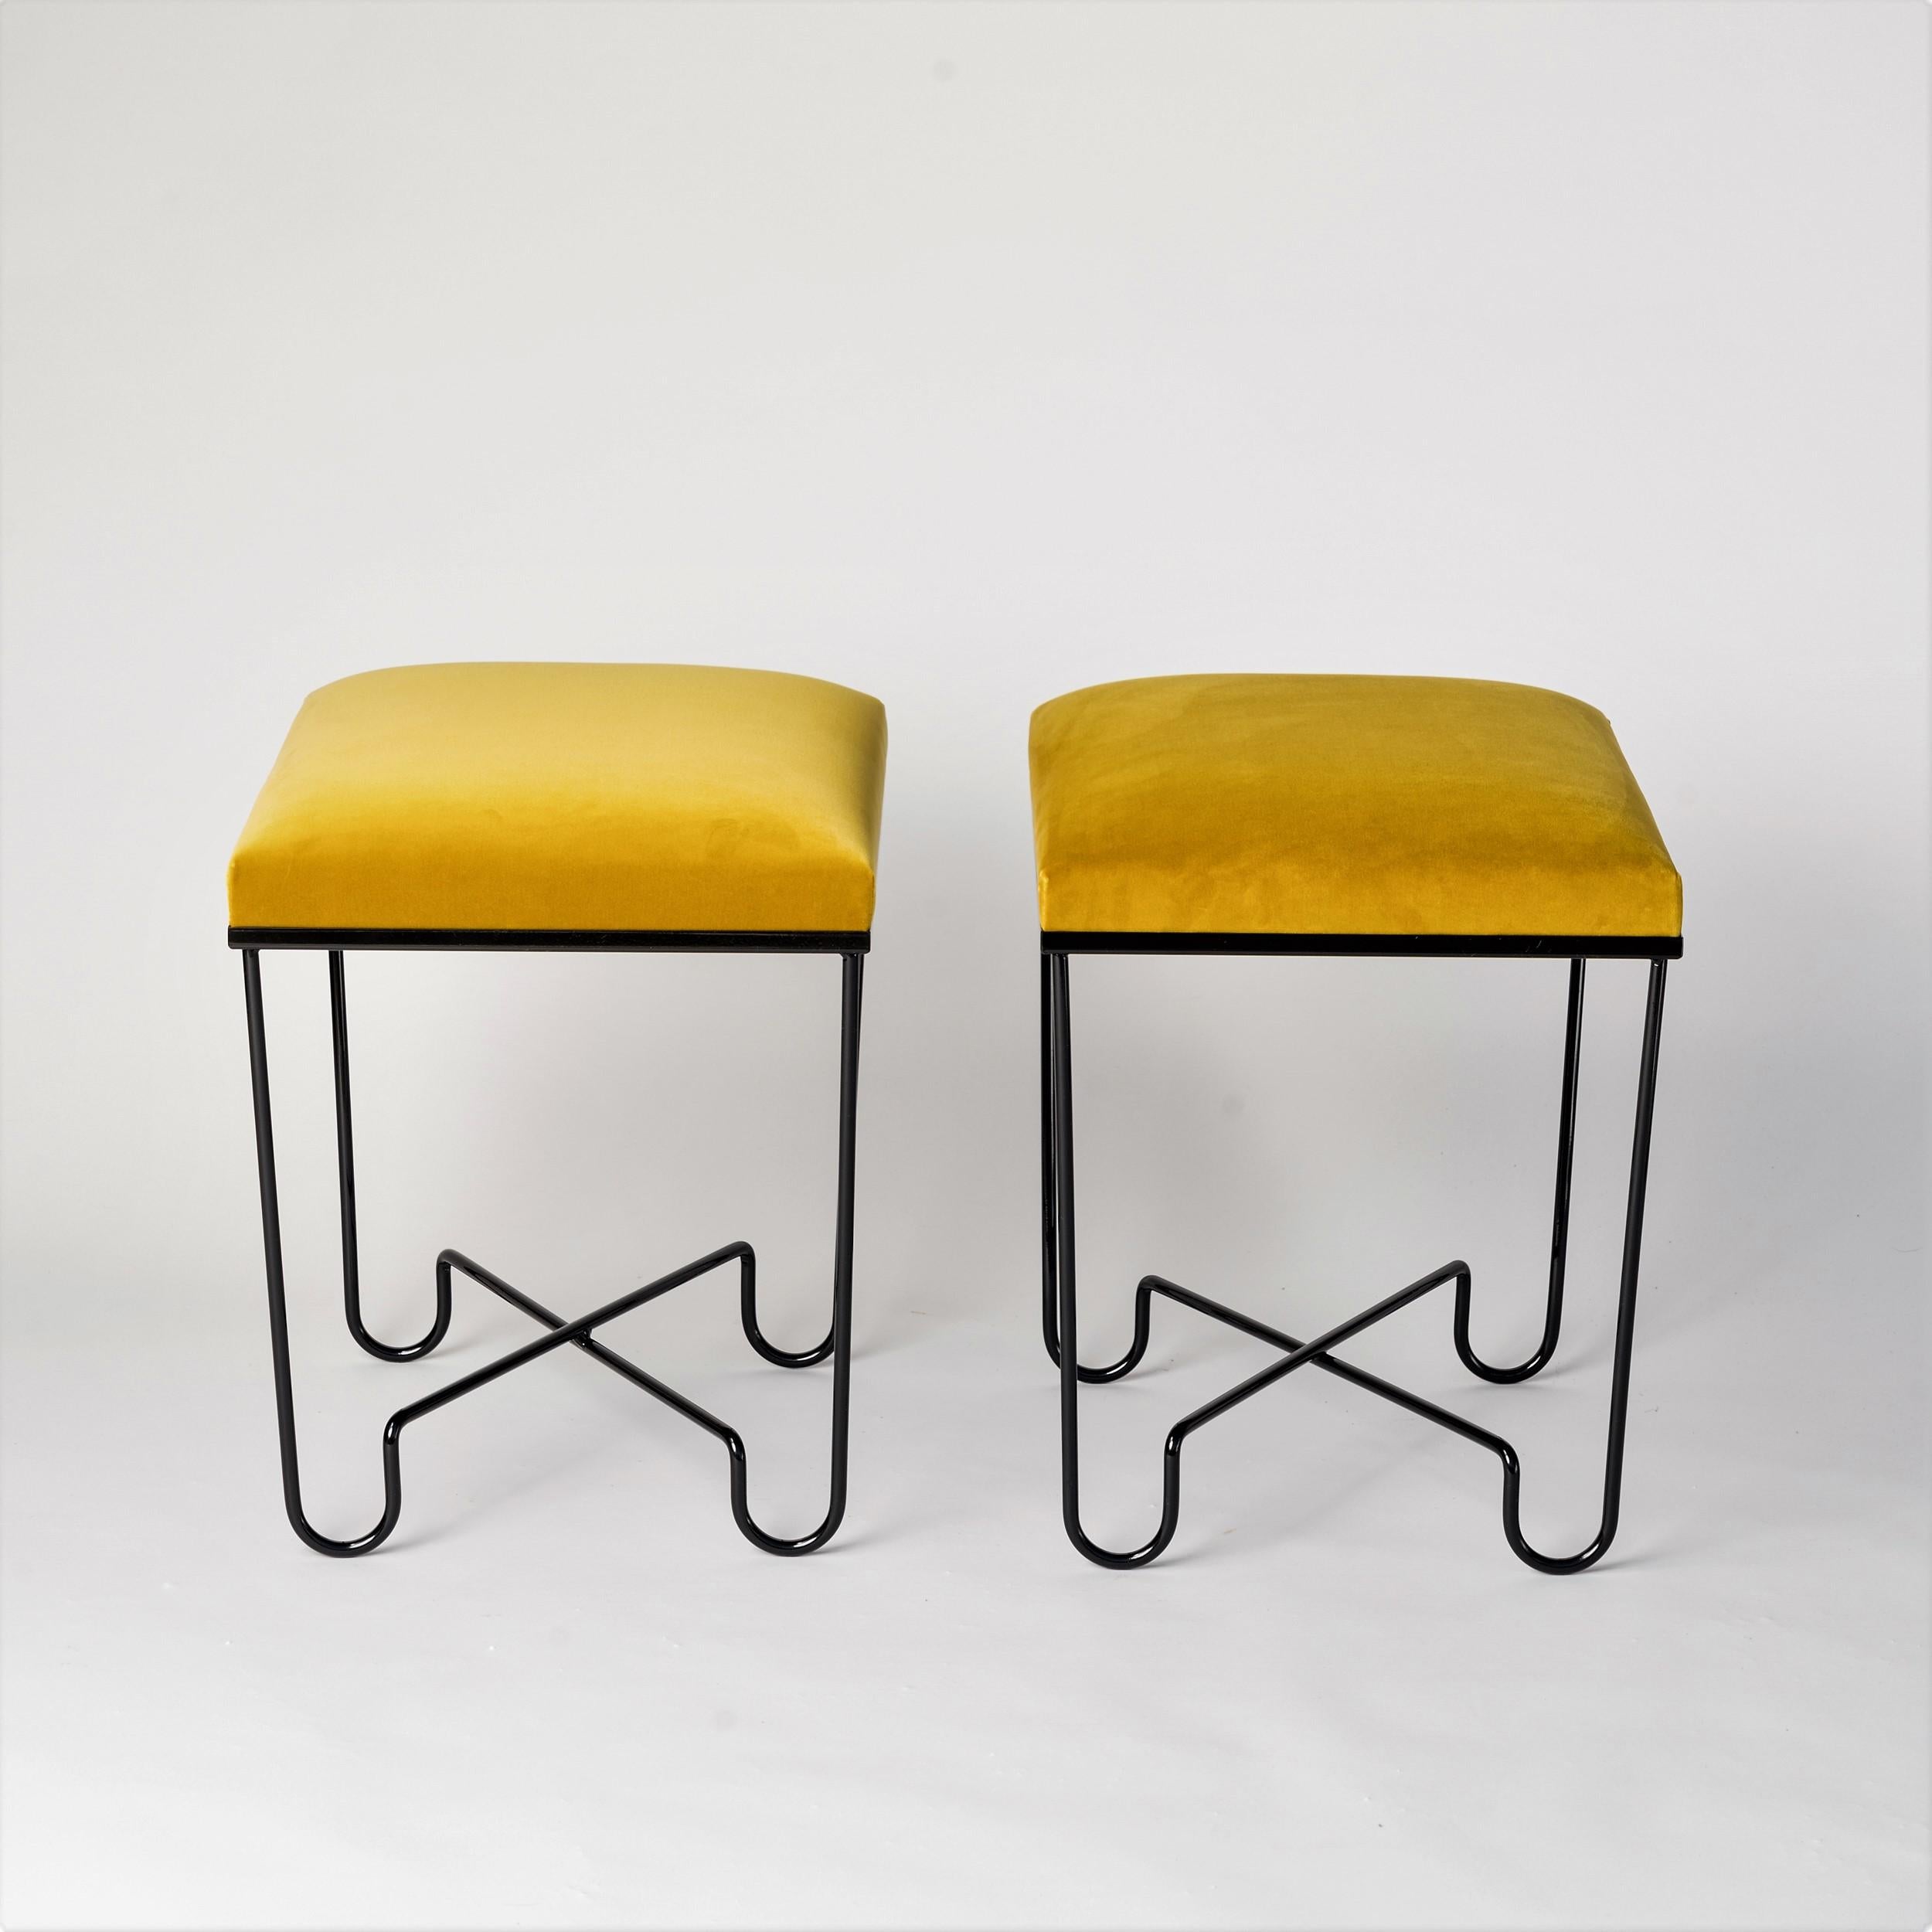 Pair of Aronde benches/stools by Facto Atelier Paris. Current production, available with black lacquered steel wire base and antique gold 